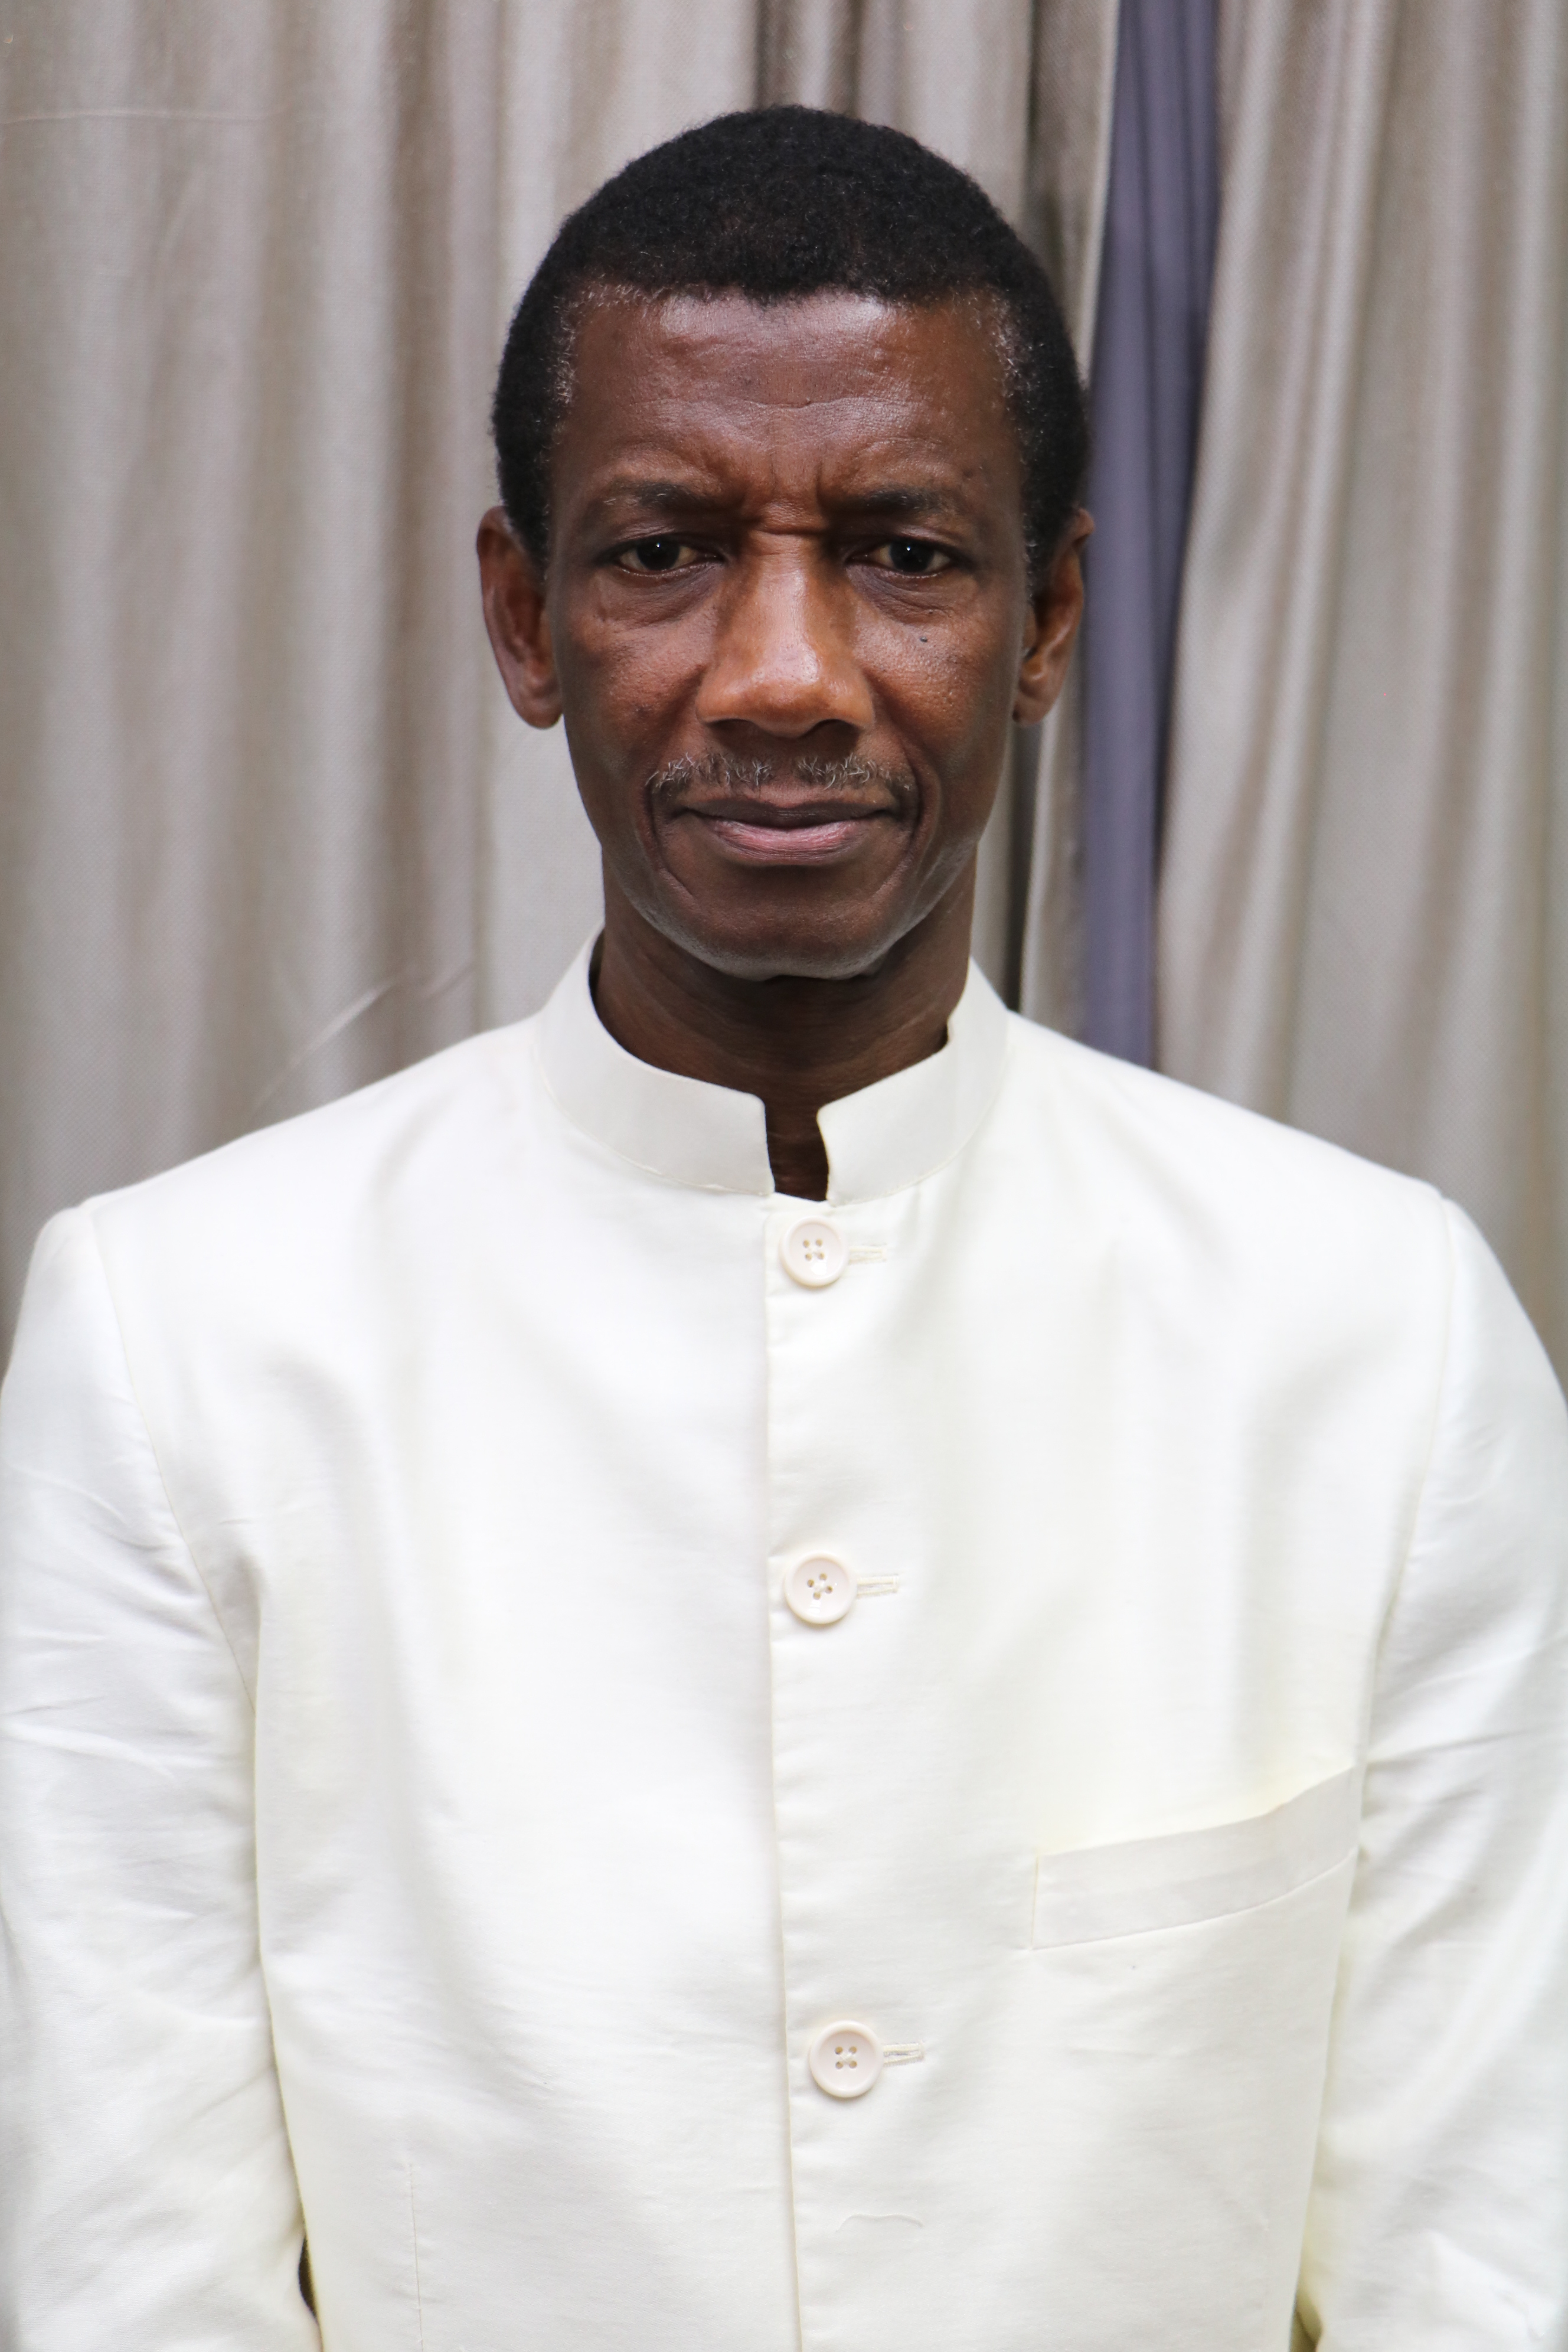 Minister of Higher Education, Research, Science and Technology – Mr. Badara Alieu Joof